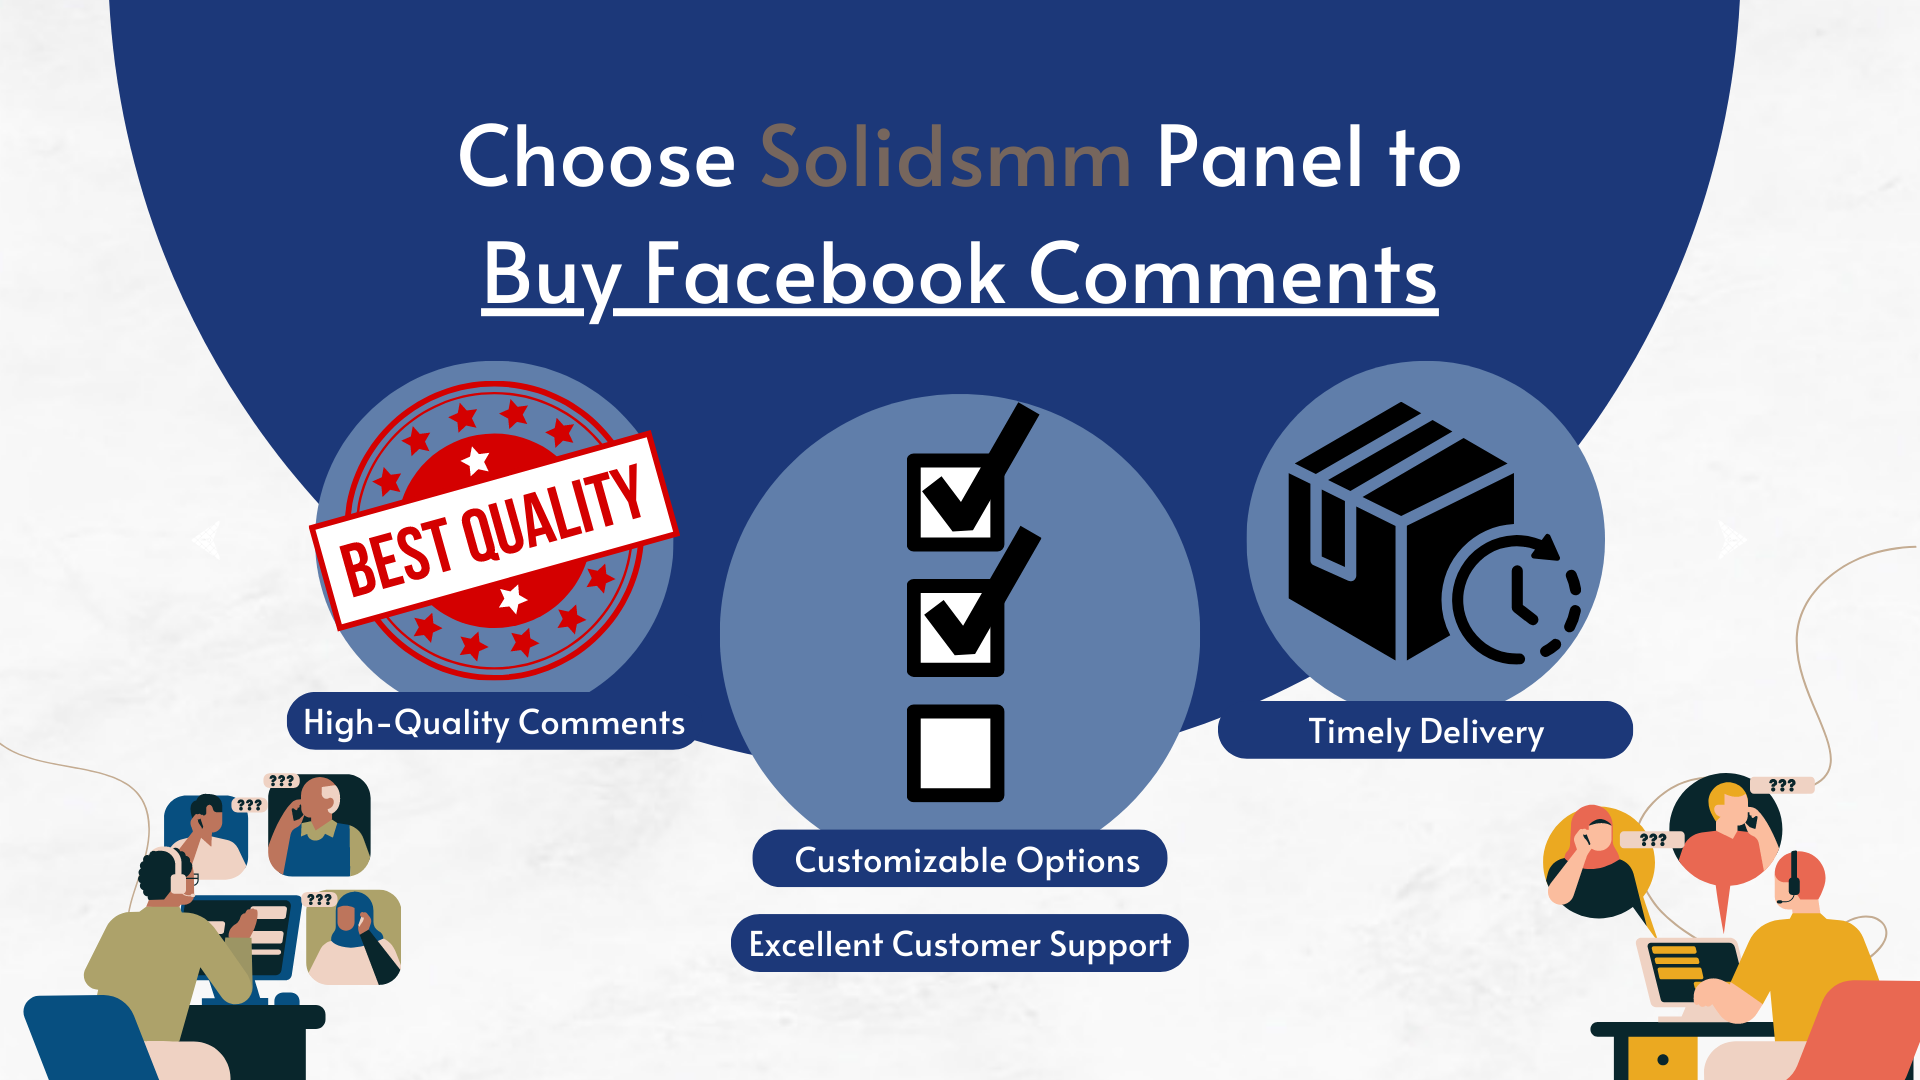 Which Social Media Marketing (SMM) Panel Offers USA Bulk Comments for Facebook Posts? – Leading SMM Panels for Increased Engagement